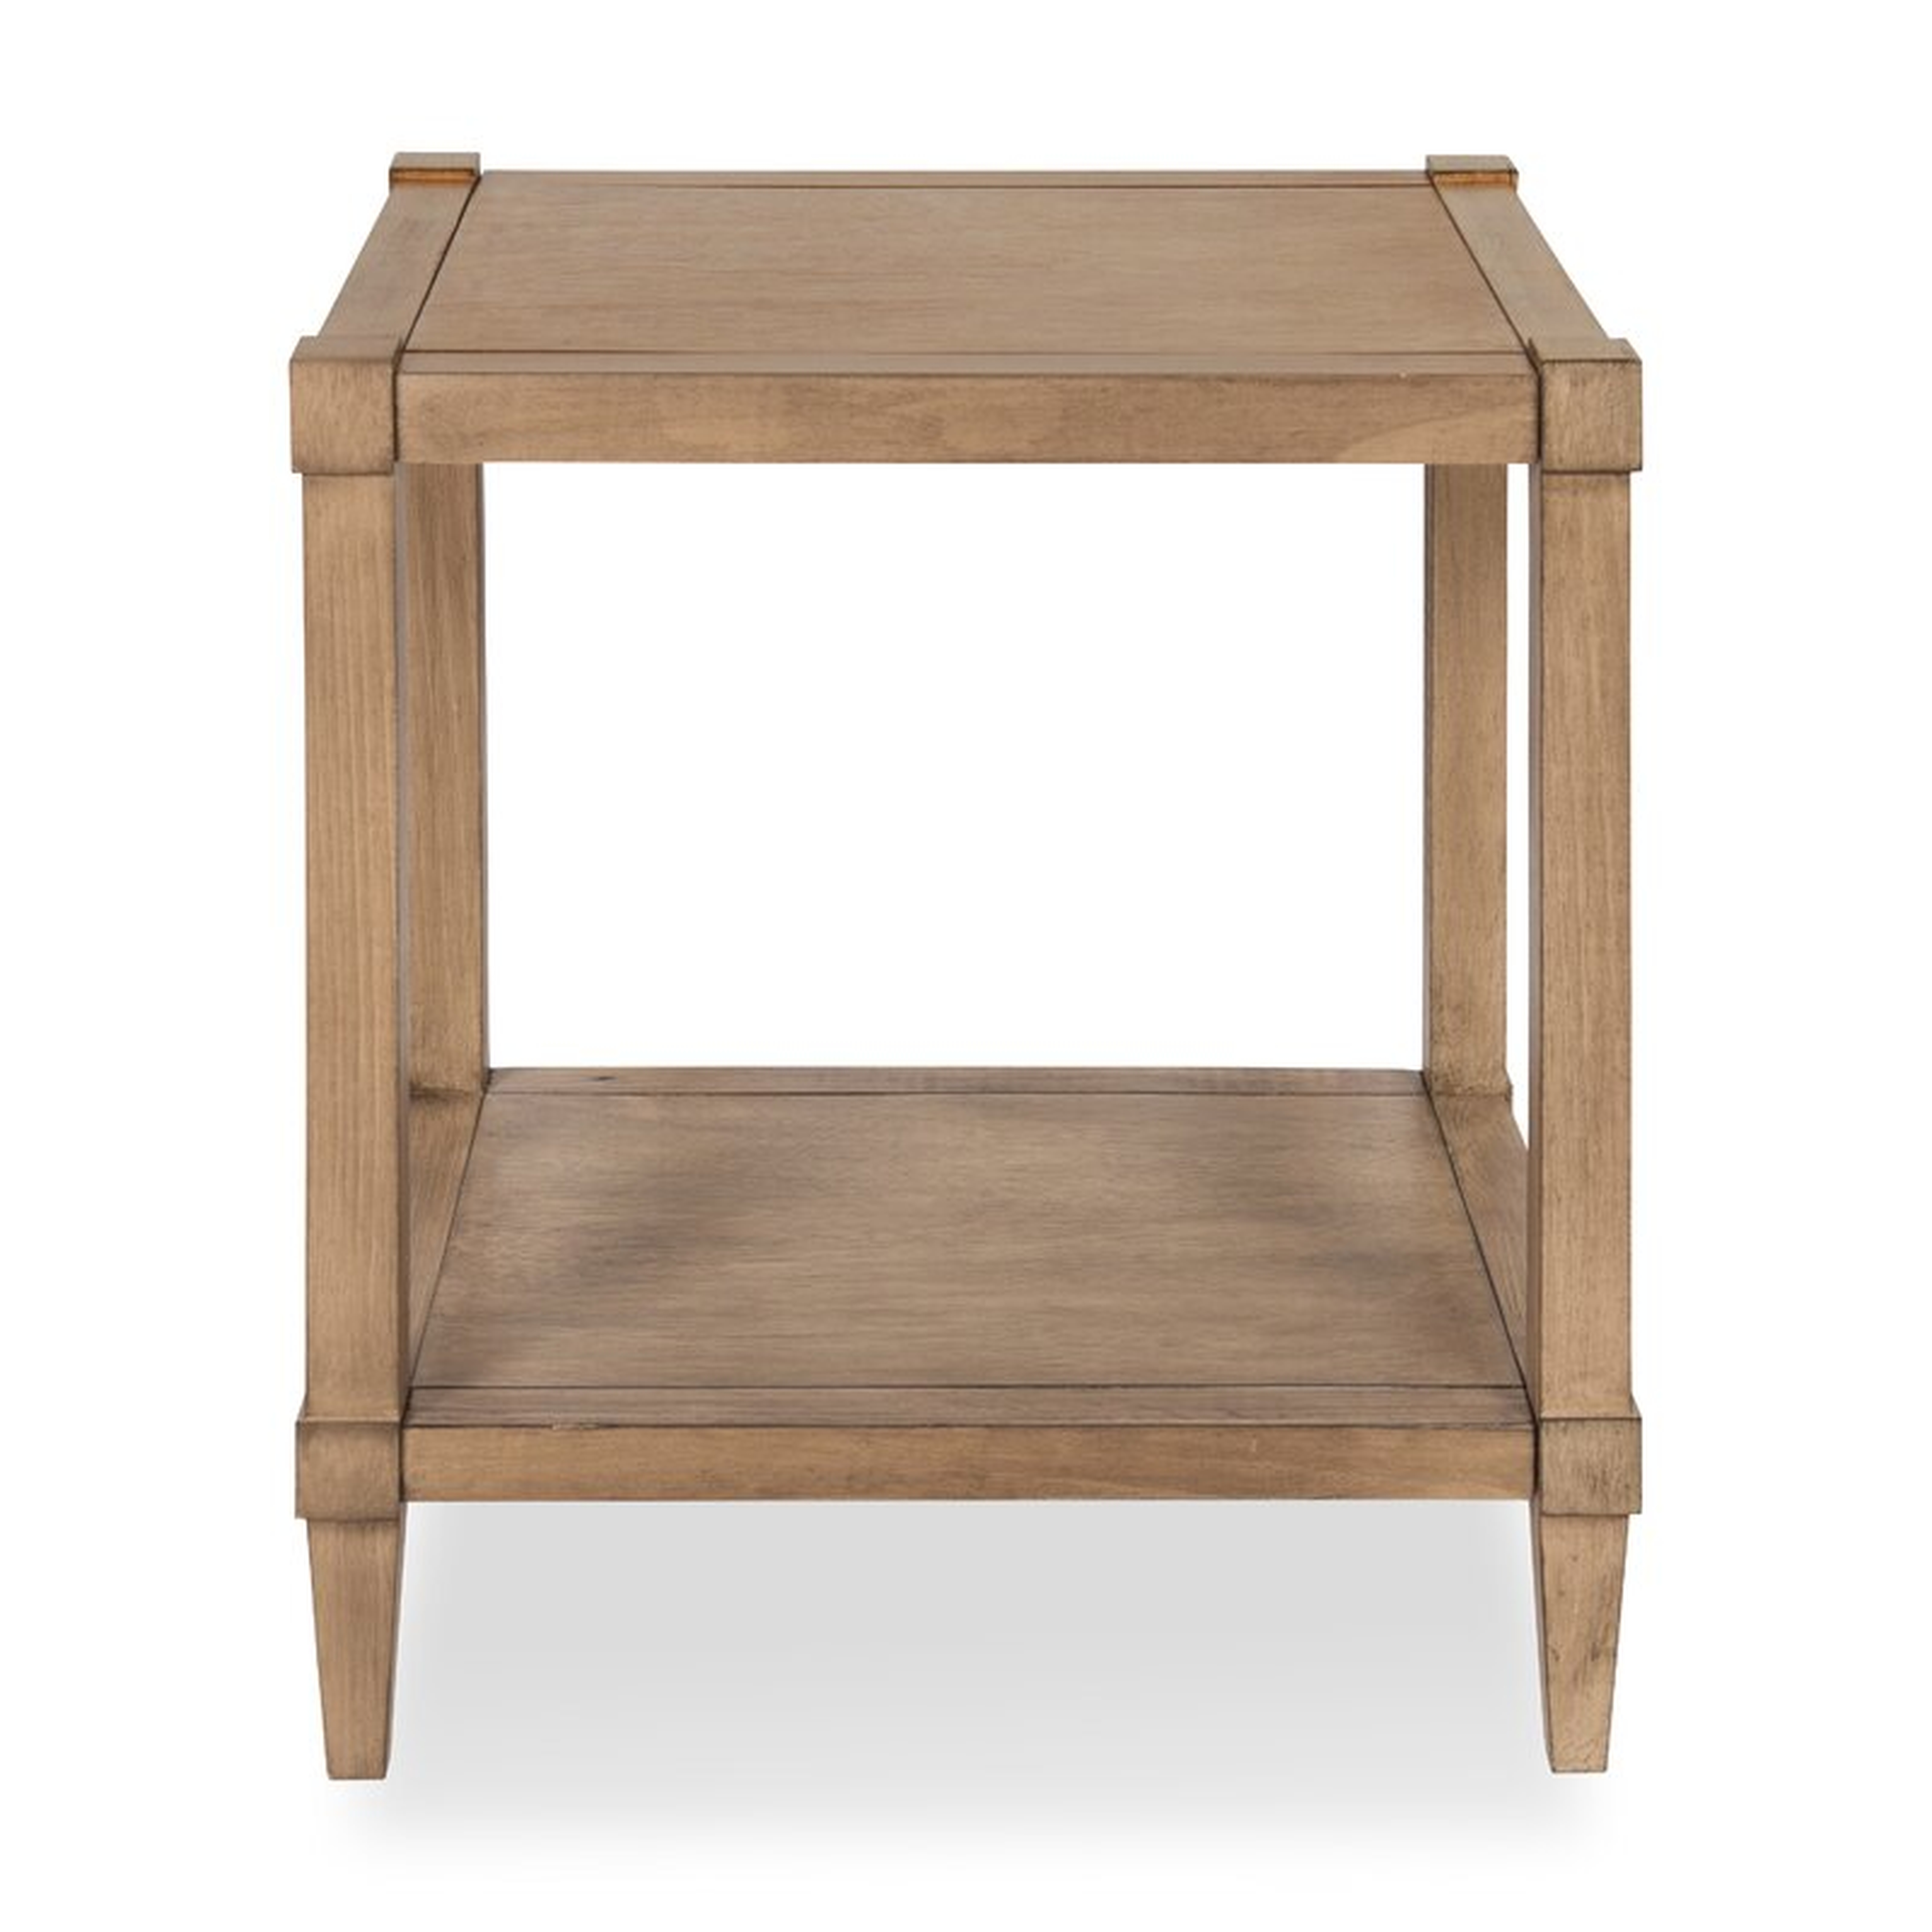 Gretchen Wooden Side Accent End Table with Storage / Light Brown - Wayfair